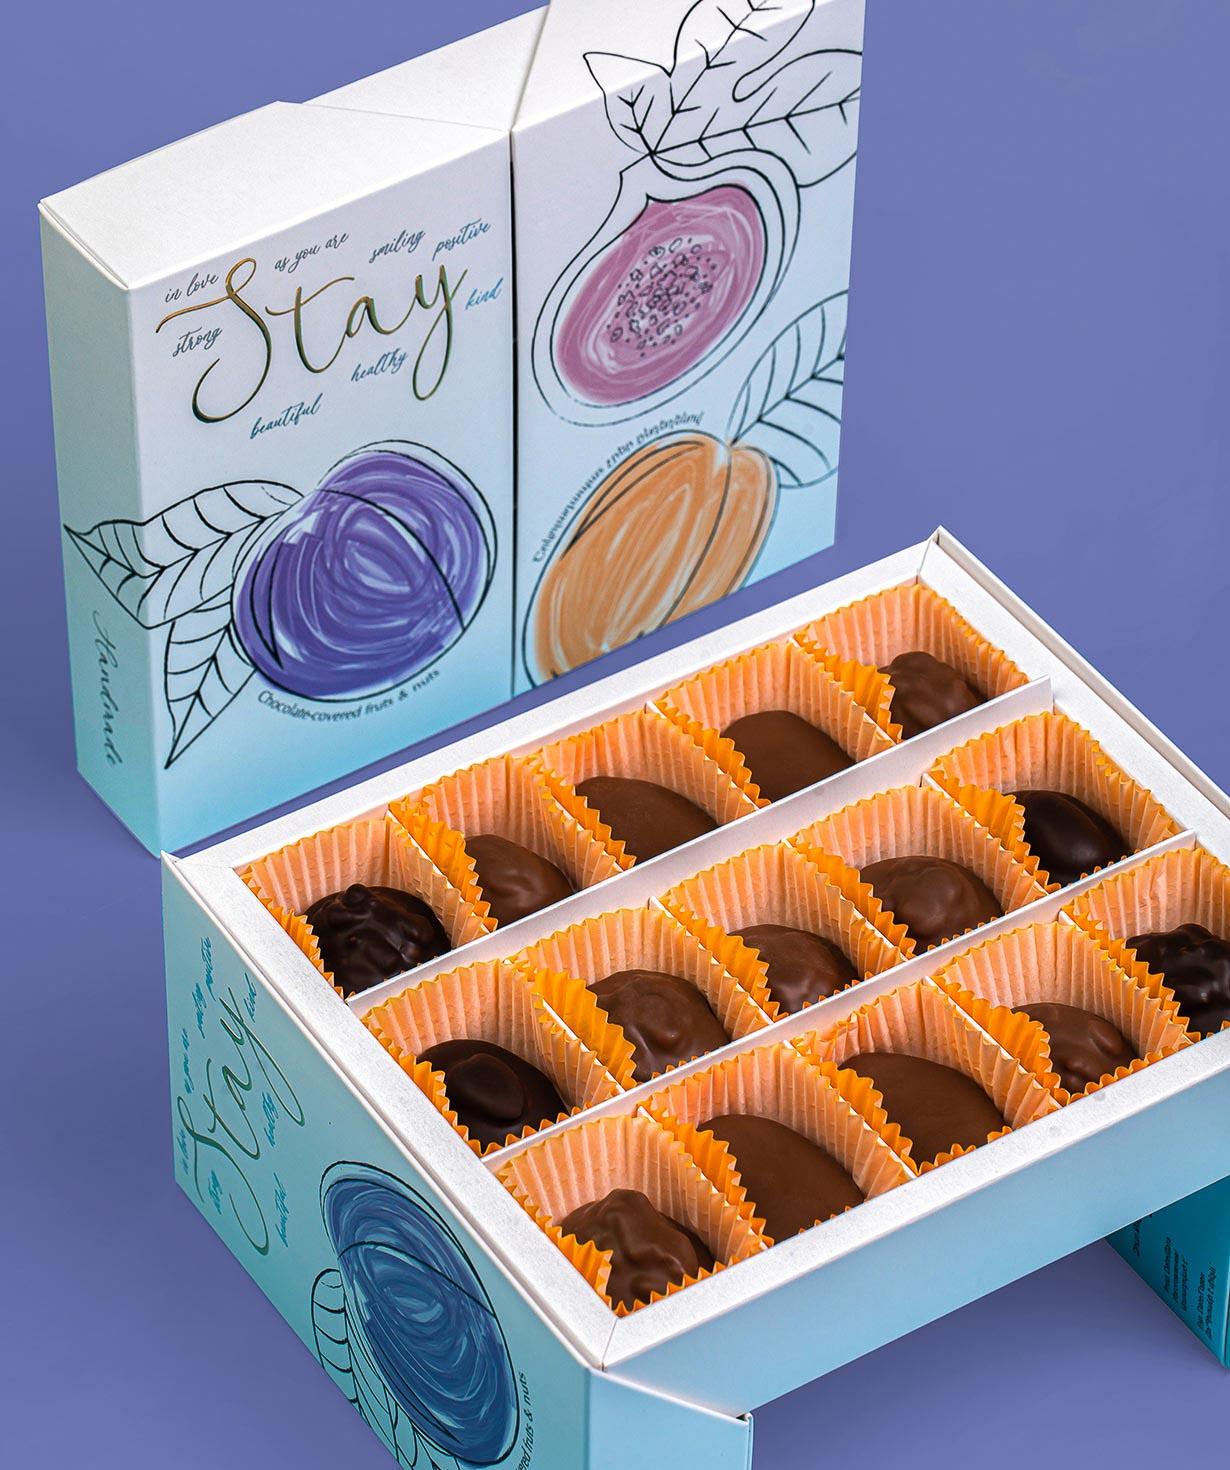 Dried fruits in chocolate ''Stay Chocolates''